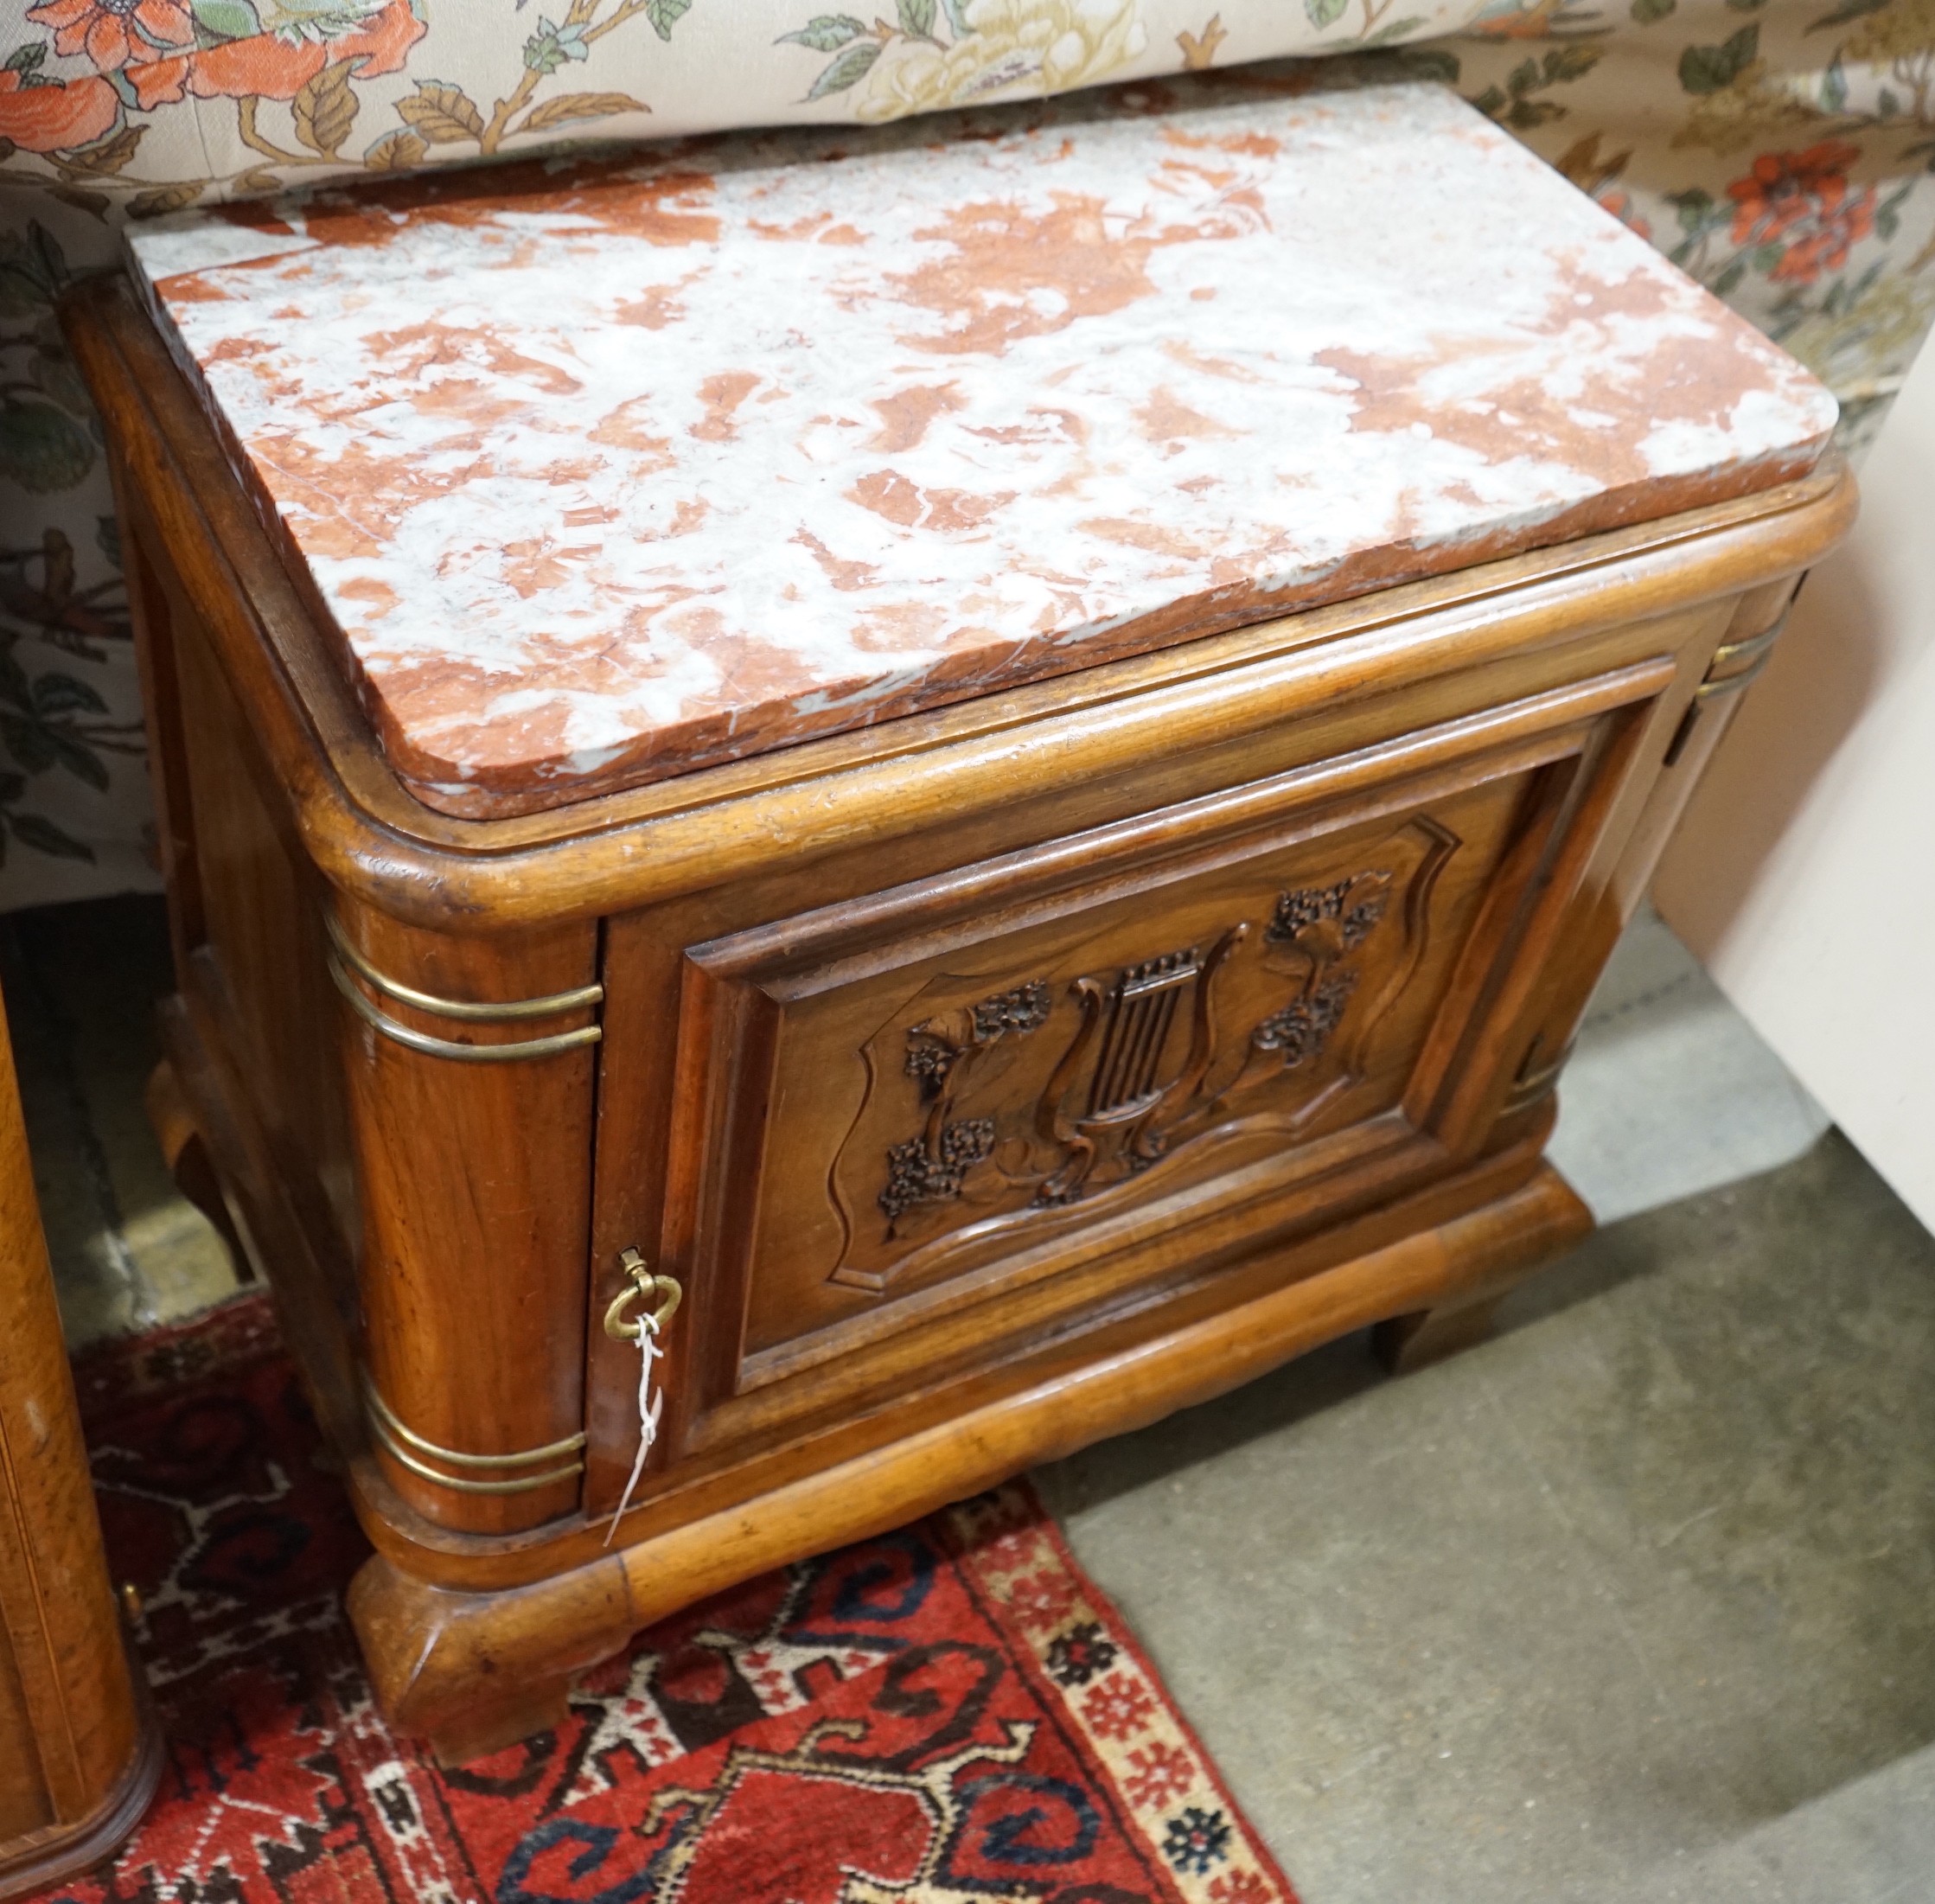 An early 20th century French marble topped carved walnut low cabinet, length 64cm, depth 35cm, height 61cm